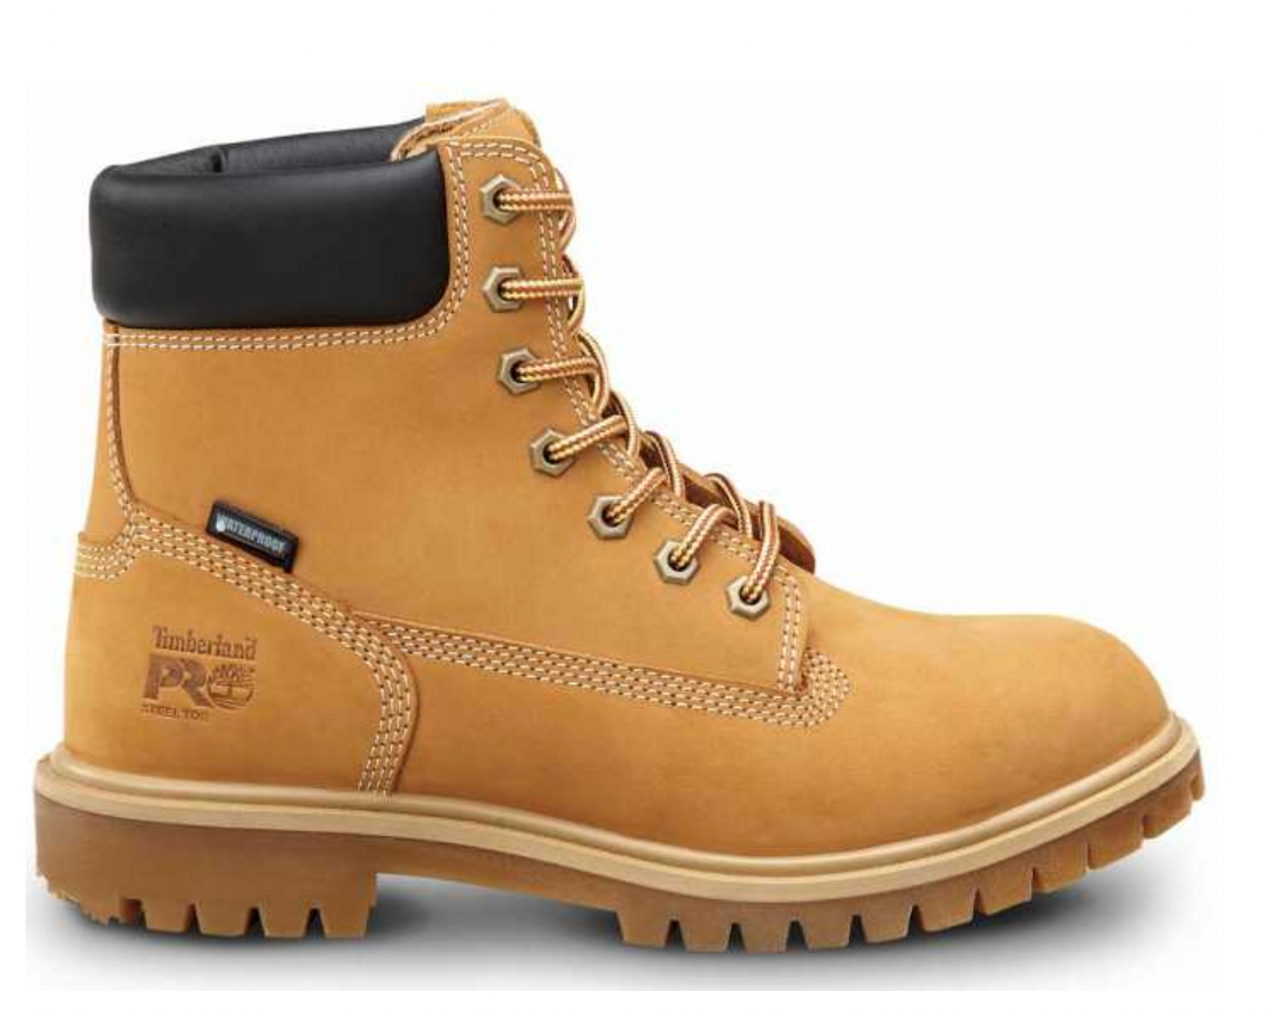 BUY | SHOP | Timberland PRO 6" Direct Attach Women's Medium Width Wheat Steel Toe Non-Slip Leather Boot (STMA1X7R) 